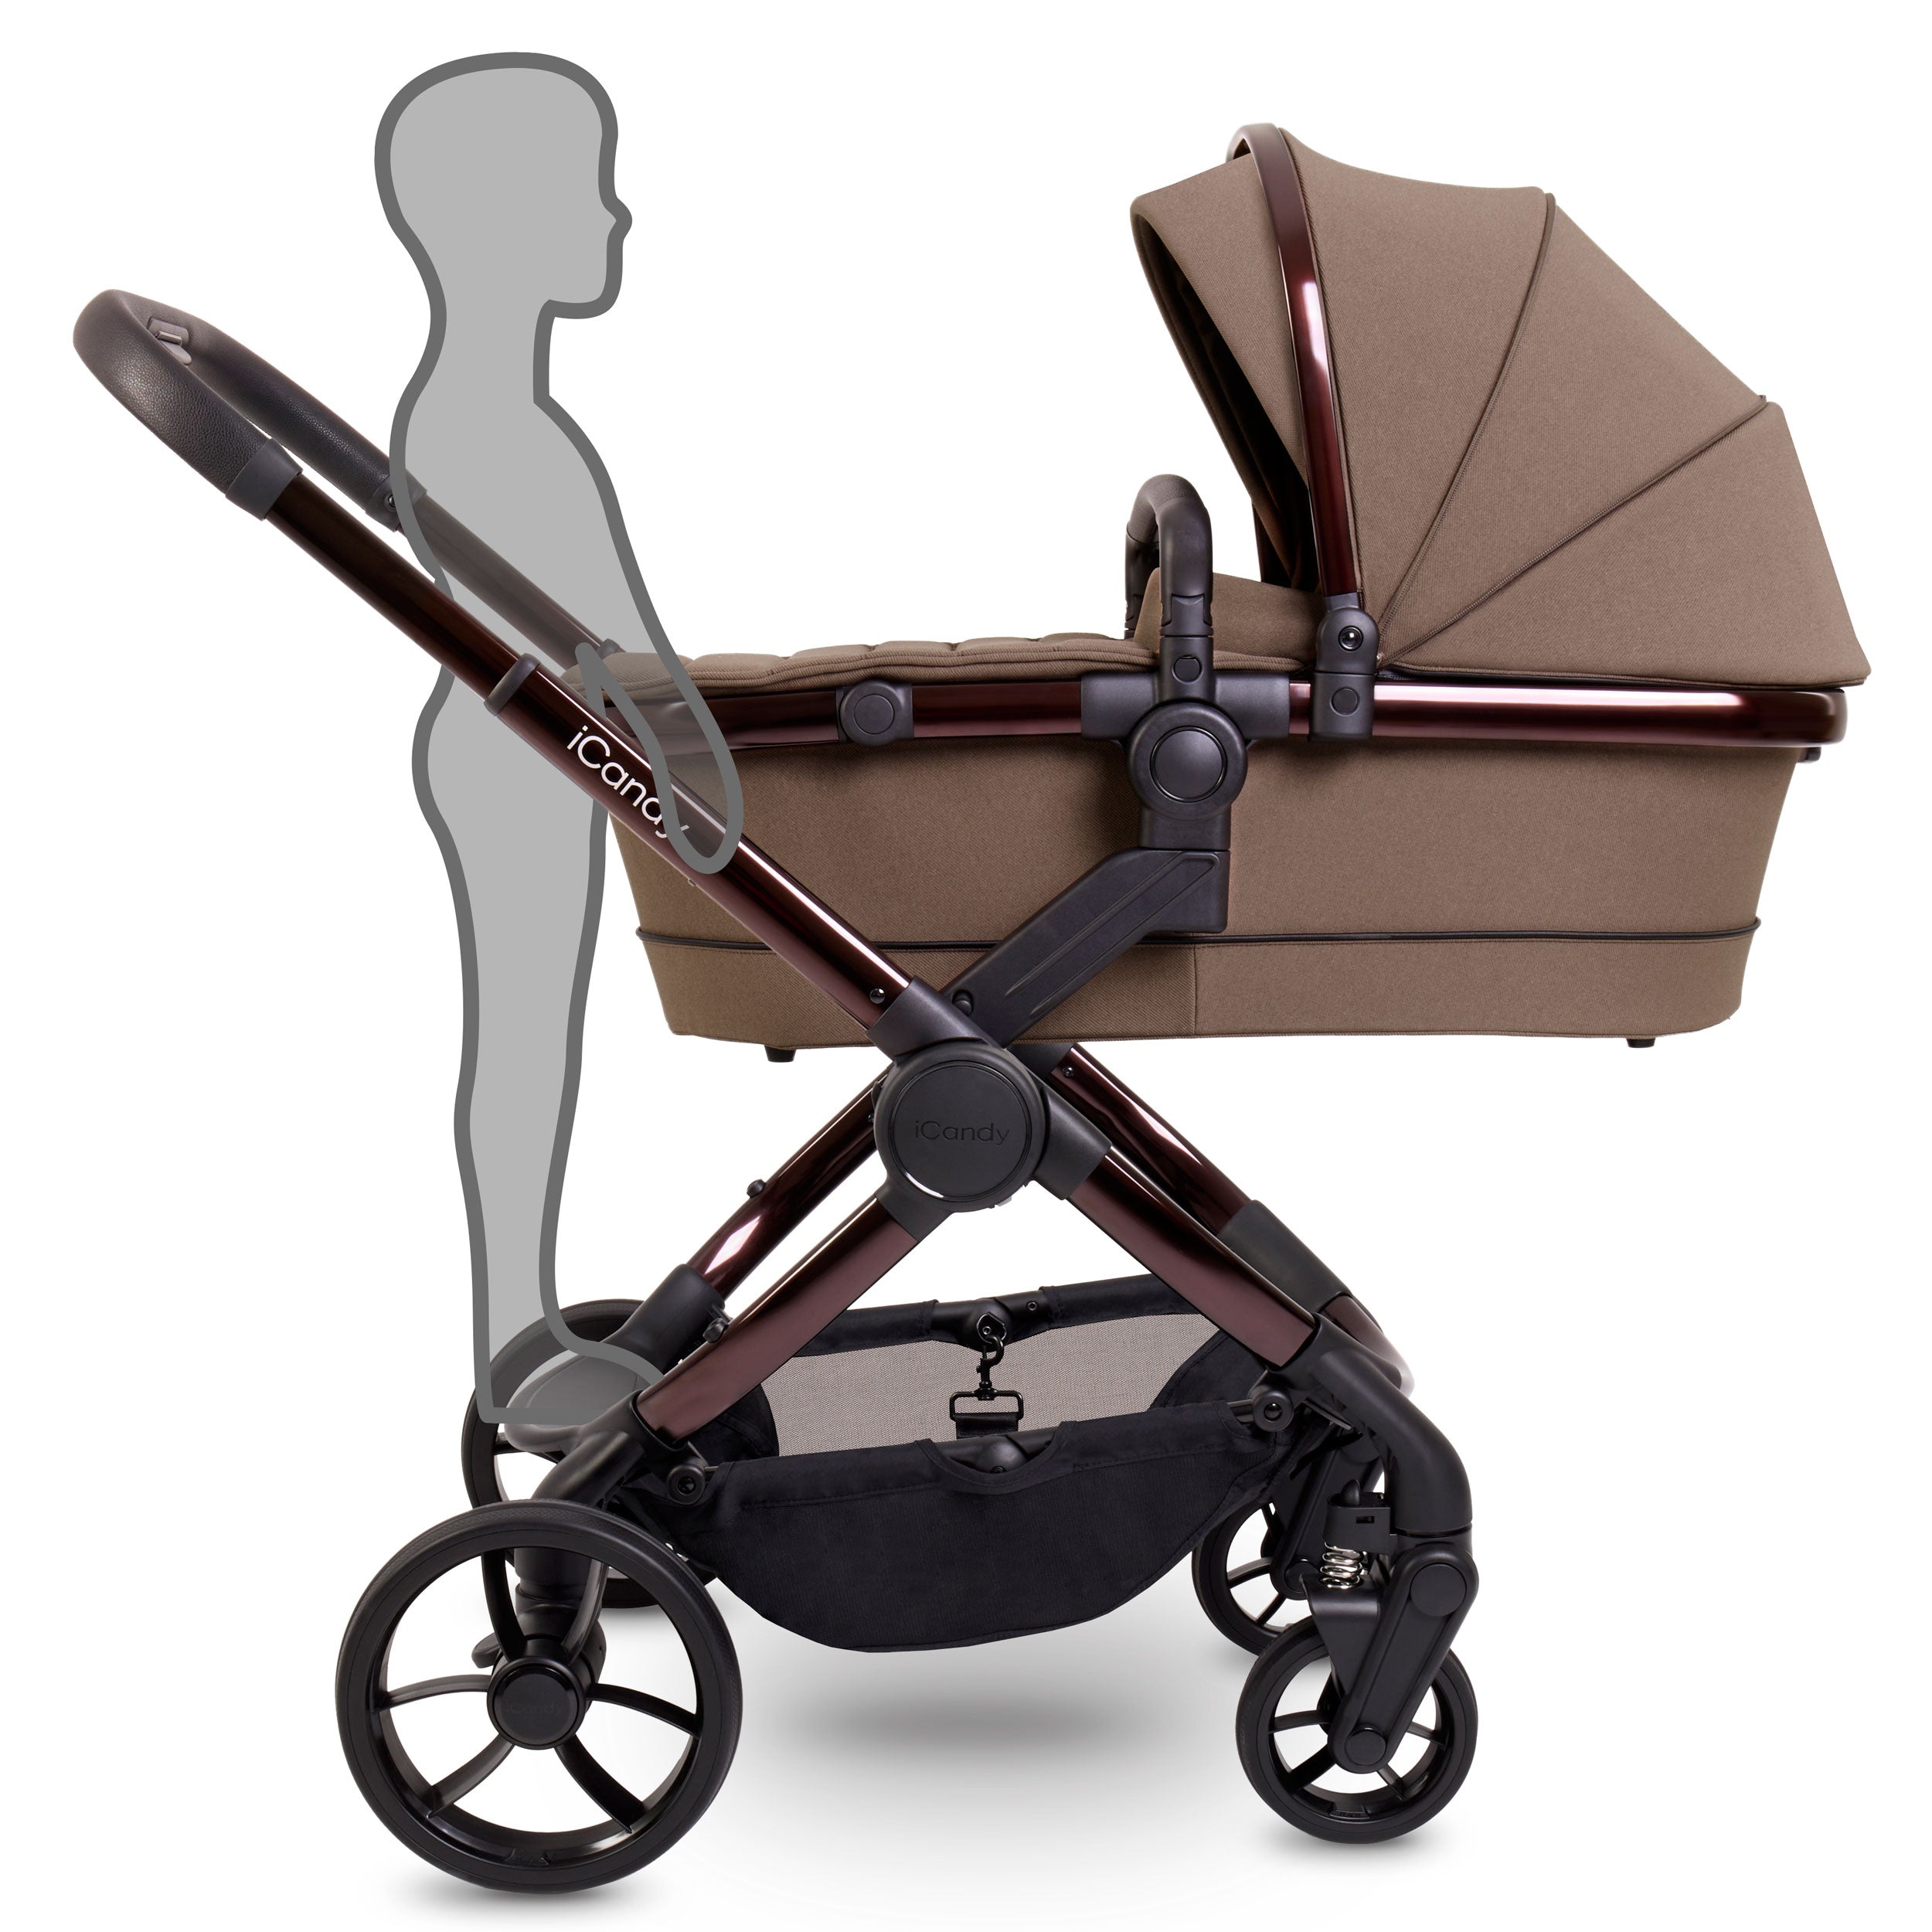 iCandy Peach 7 Cybex Combo Set in Coco